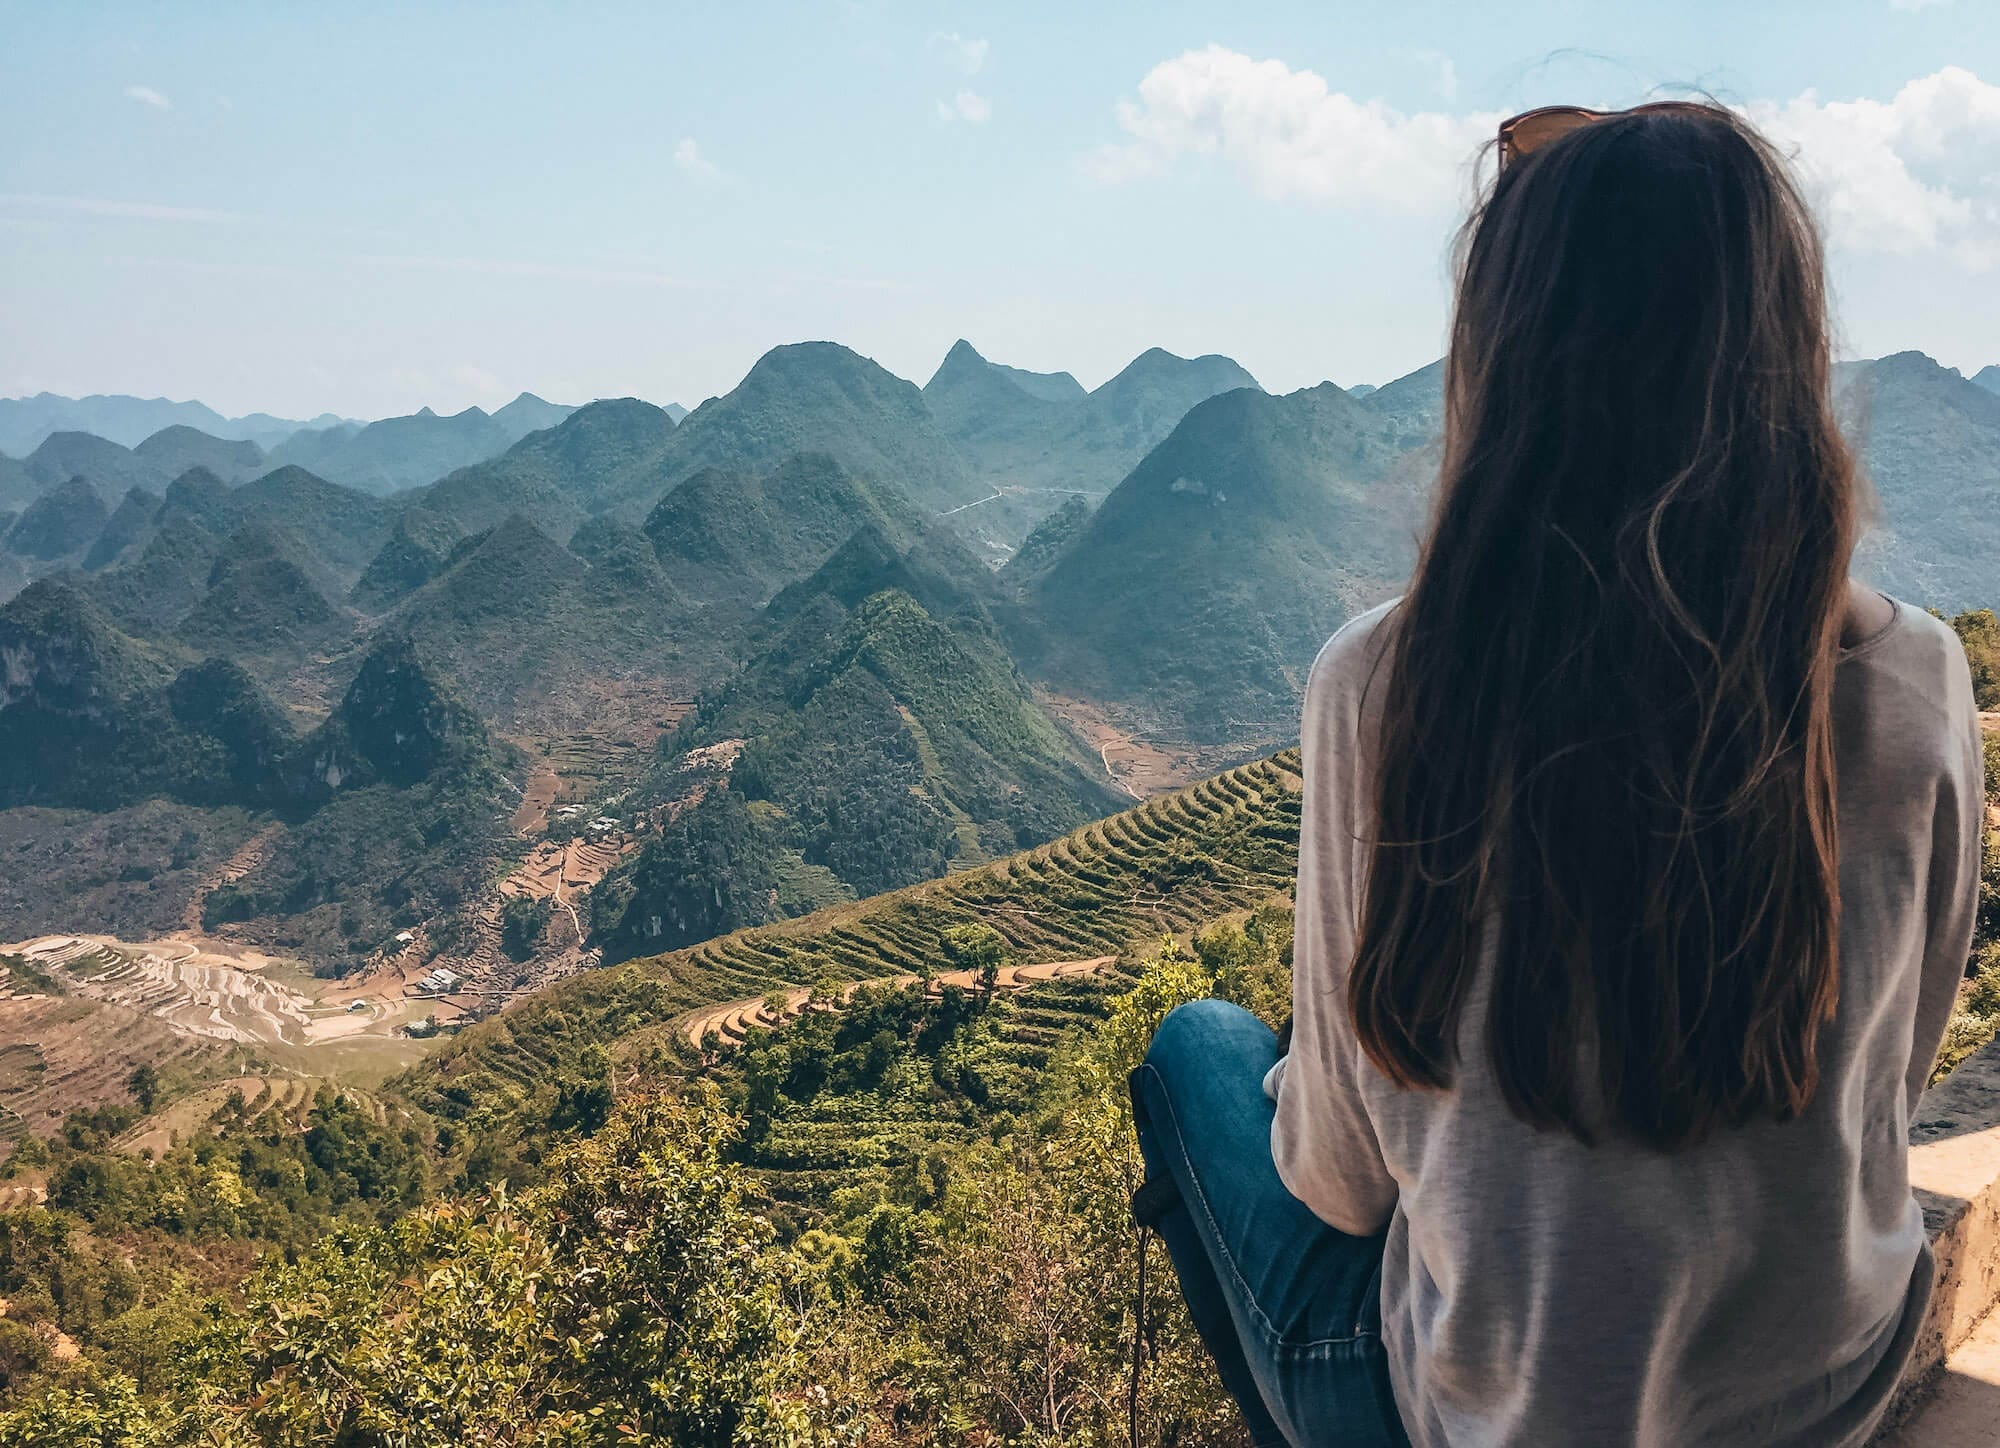 THE SAFETY GUIDELINES FOR SINGLE FEMALE TRAVELERS TO VIETNAM